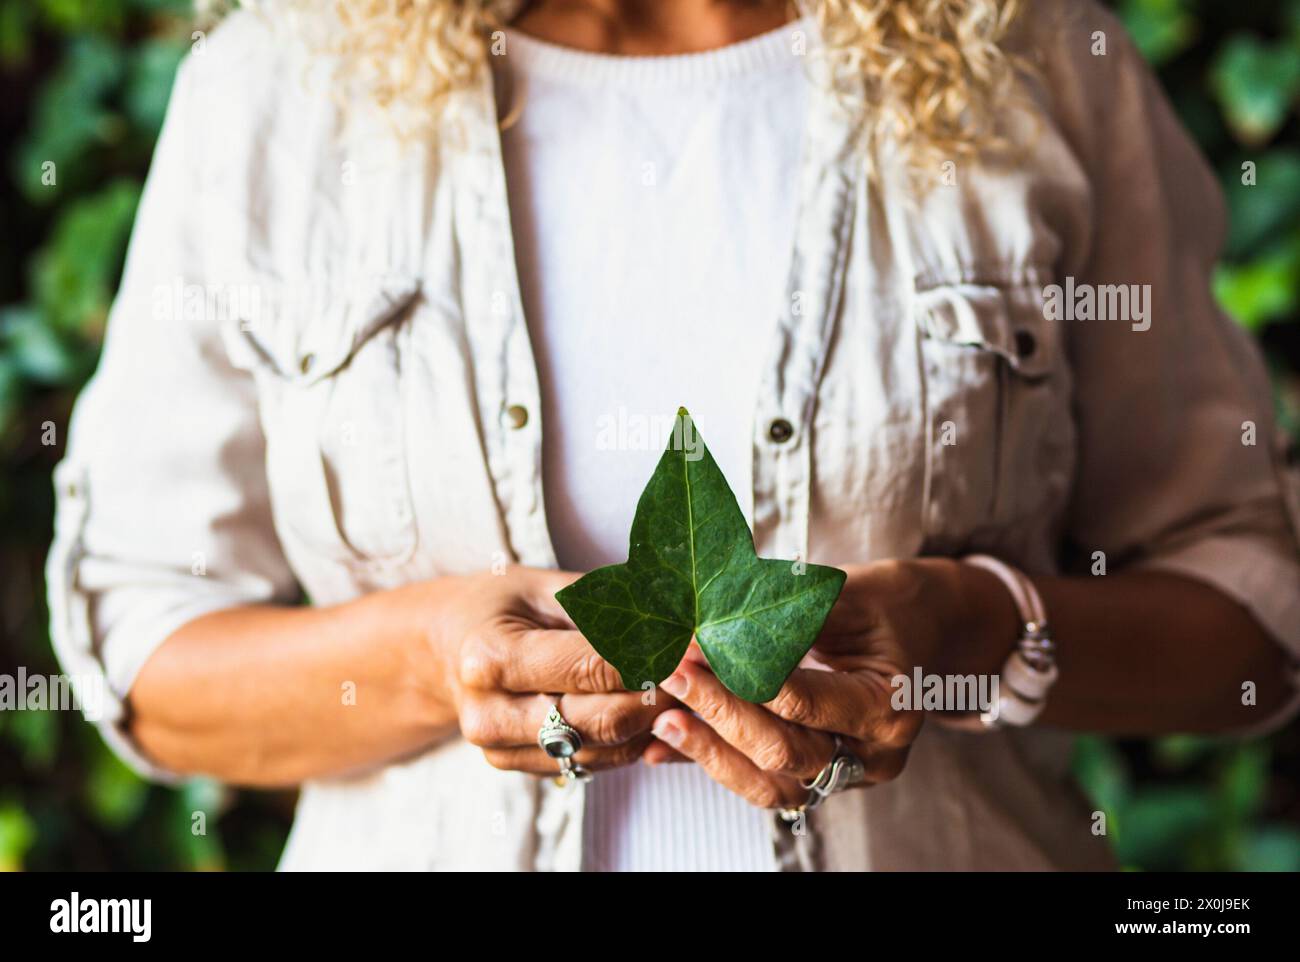 Human people and nature love concept lifestyle. Close up of woman holding natural leaf with hands. Leaves foliage nature outdoor background Stock Photo